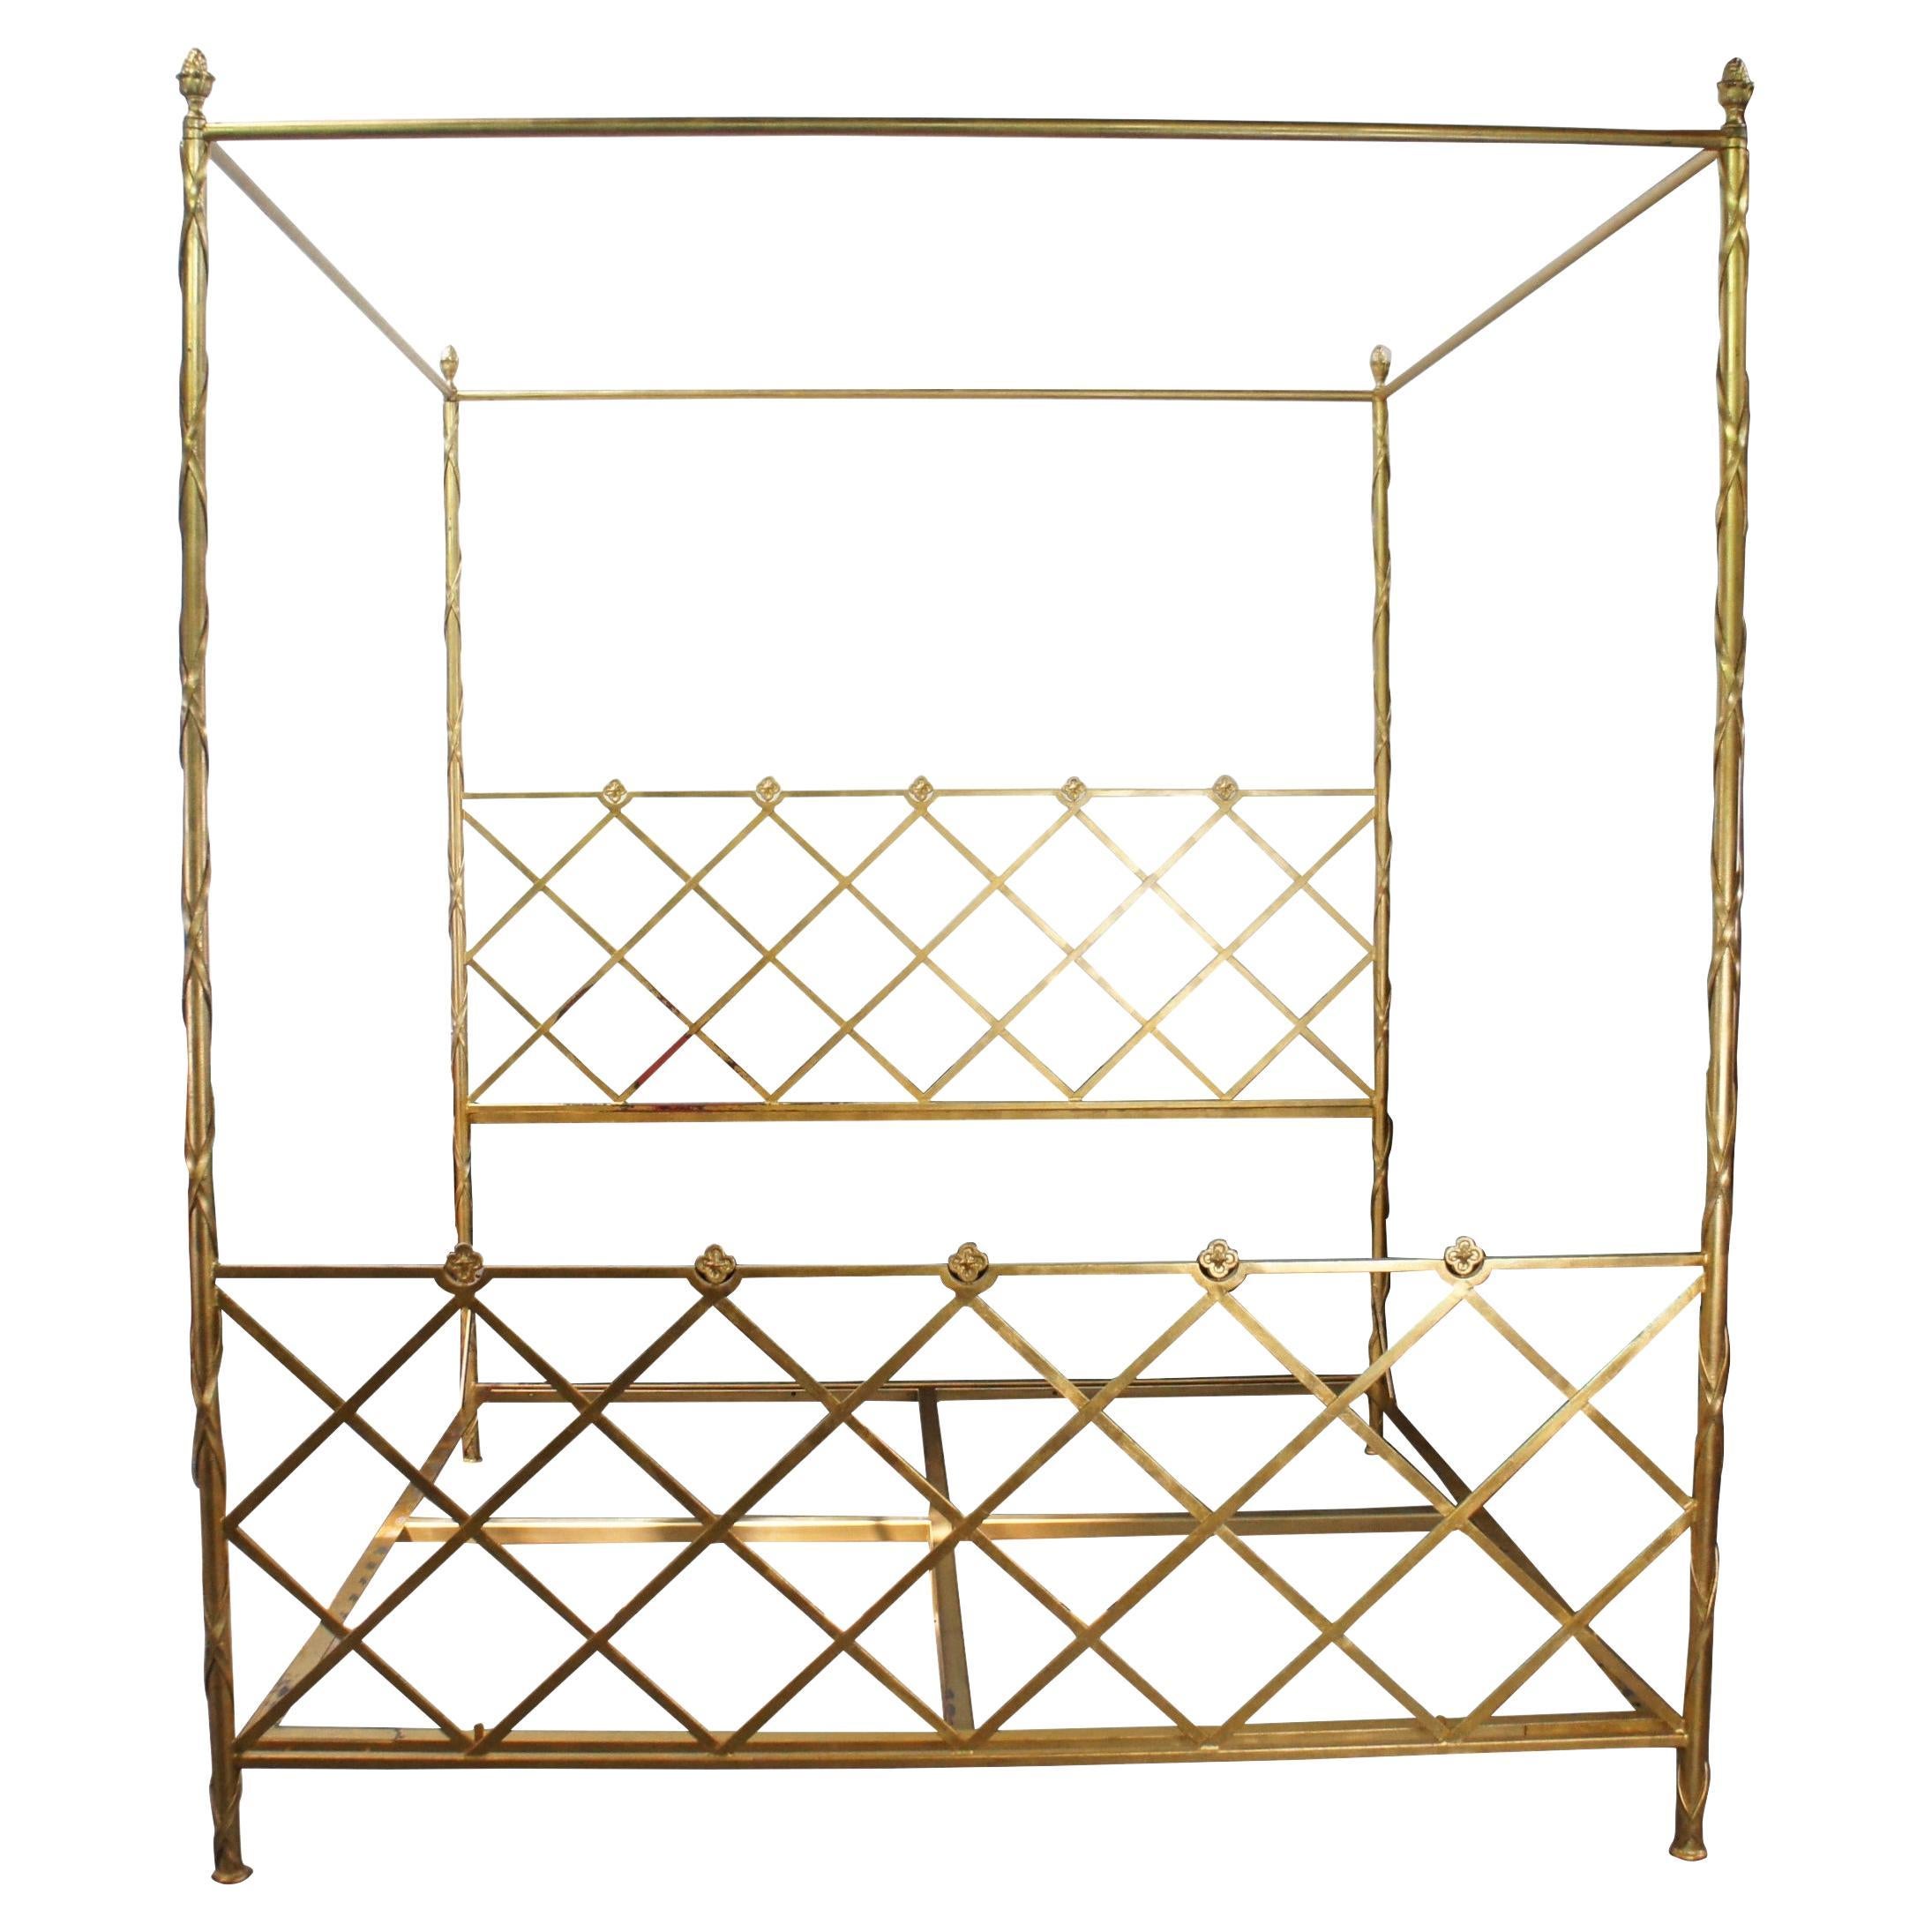 Vintage Neoclassical Modern Gold Leaf King Size Poster Bed Lattice Tester Canopy